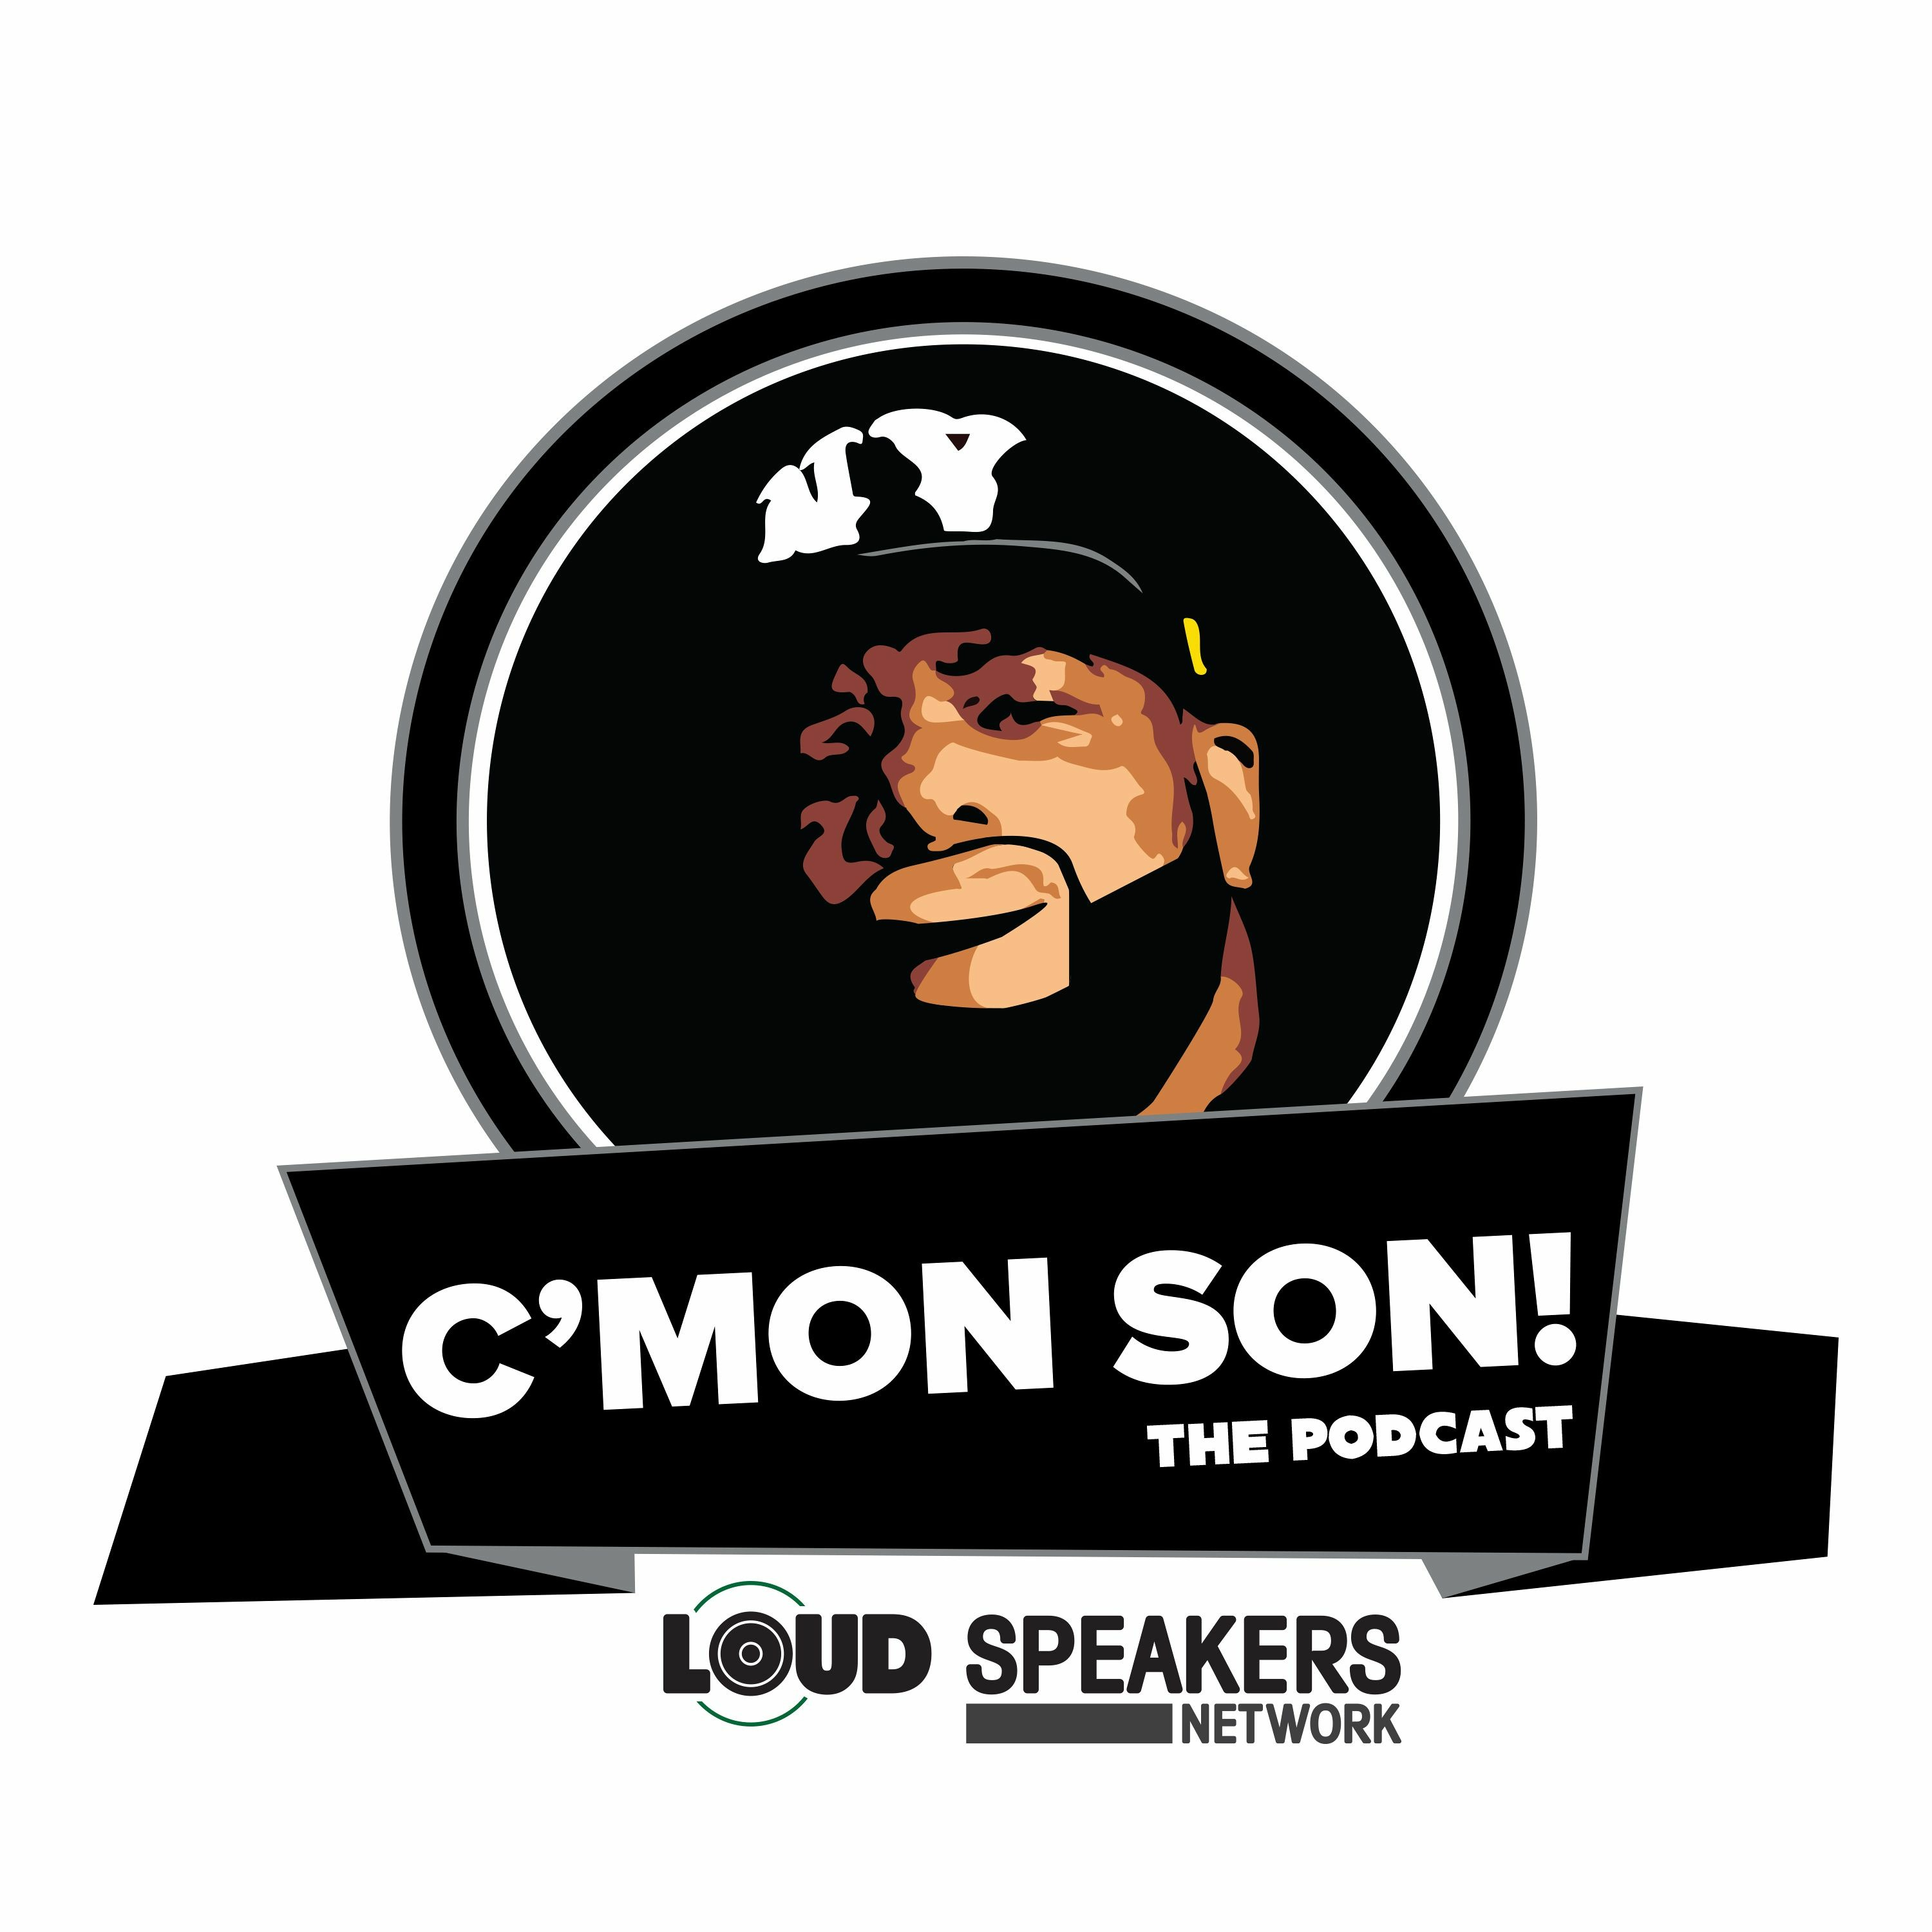 Ep. #197: C'mon Son! Year In Review 2021 Pt. 2